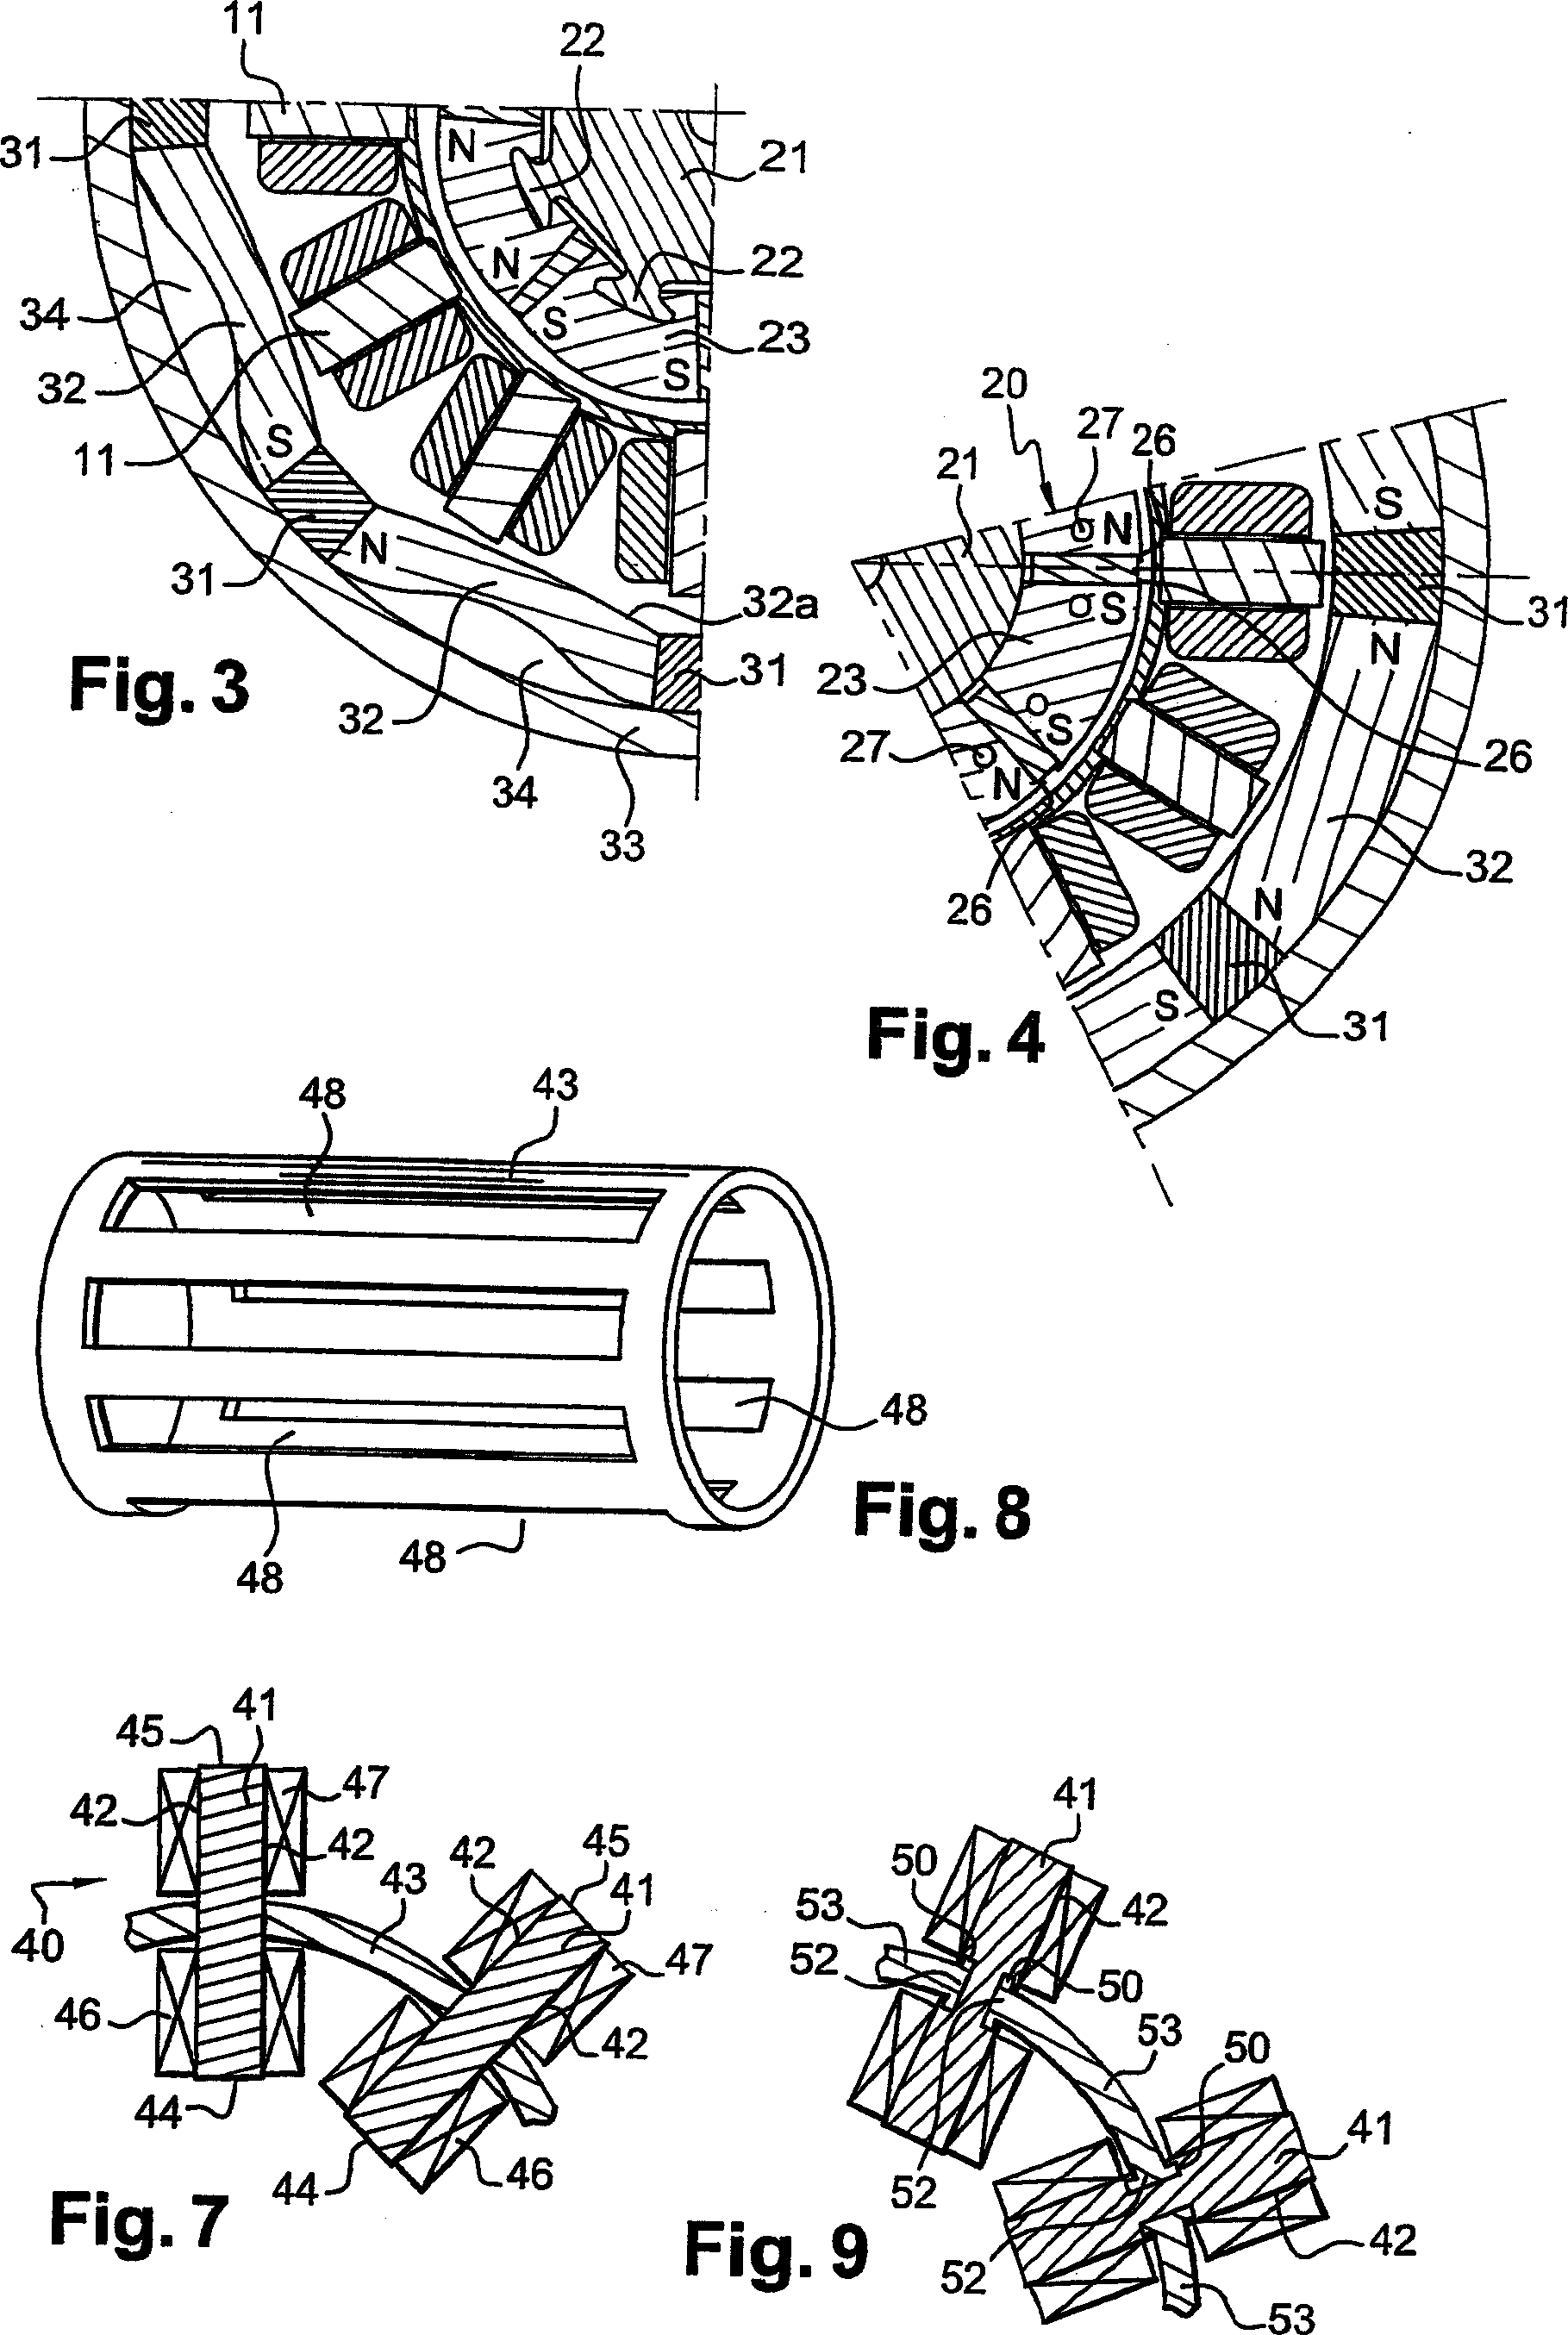 Rotary electric machine comprising a stator and two rotors